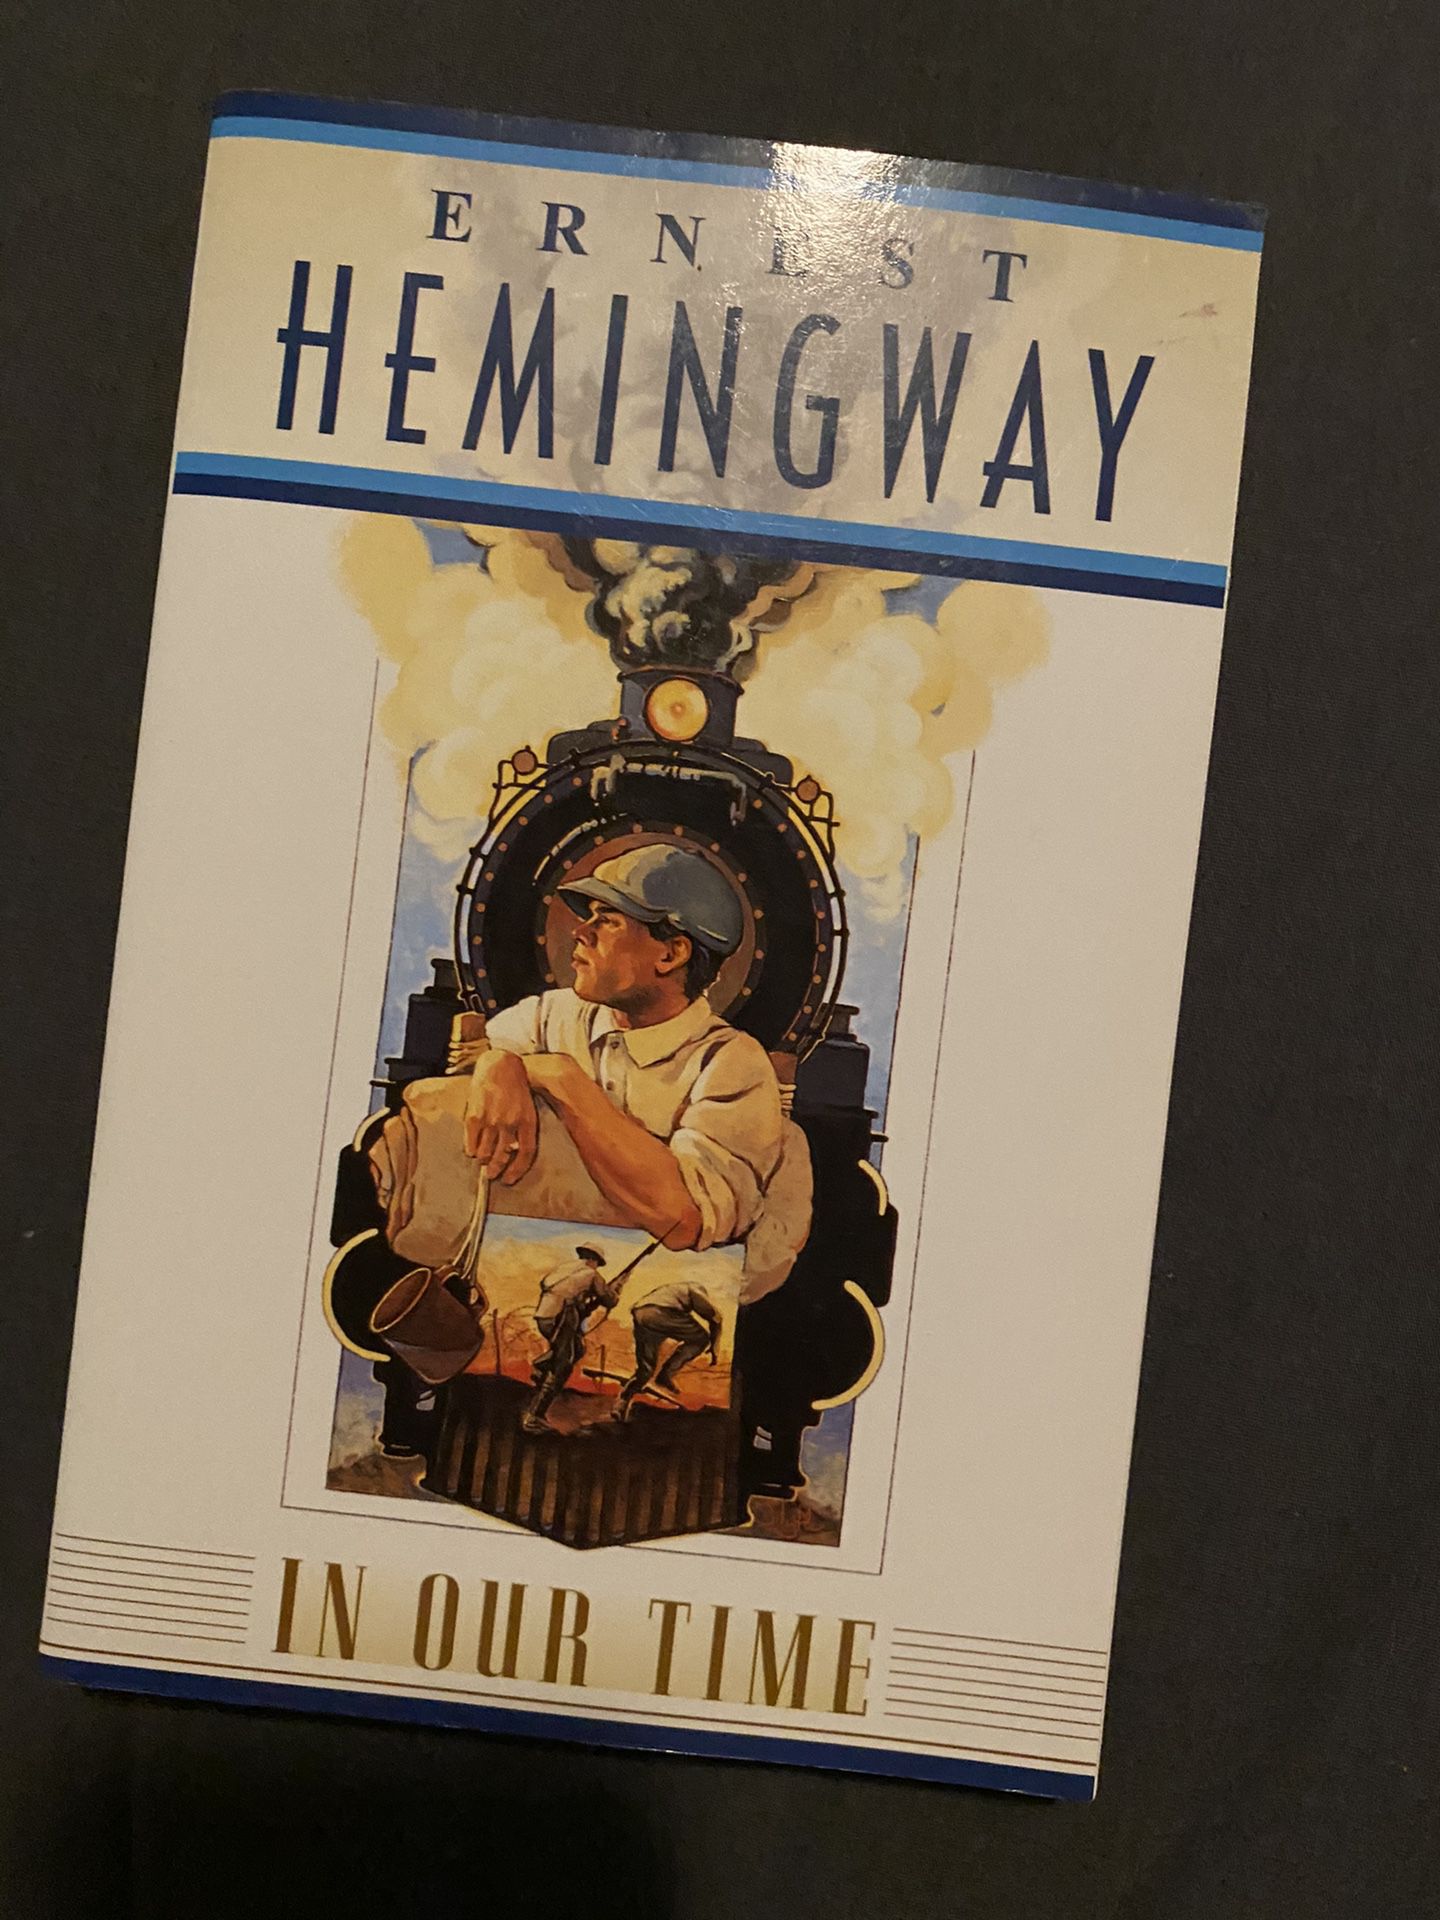 Book “In our town” by Ernest Hemingway